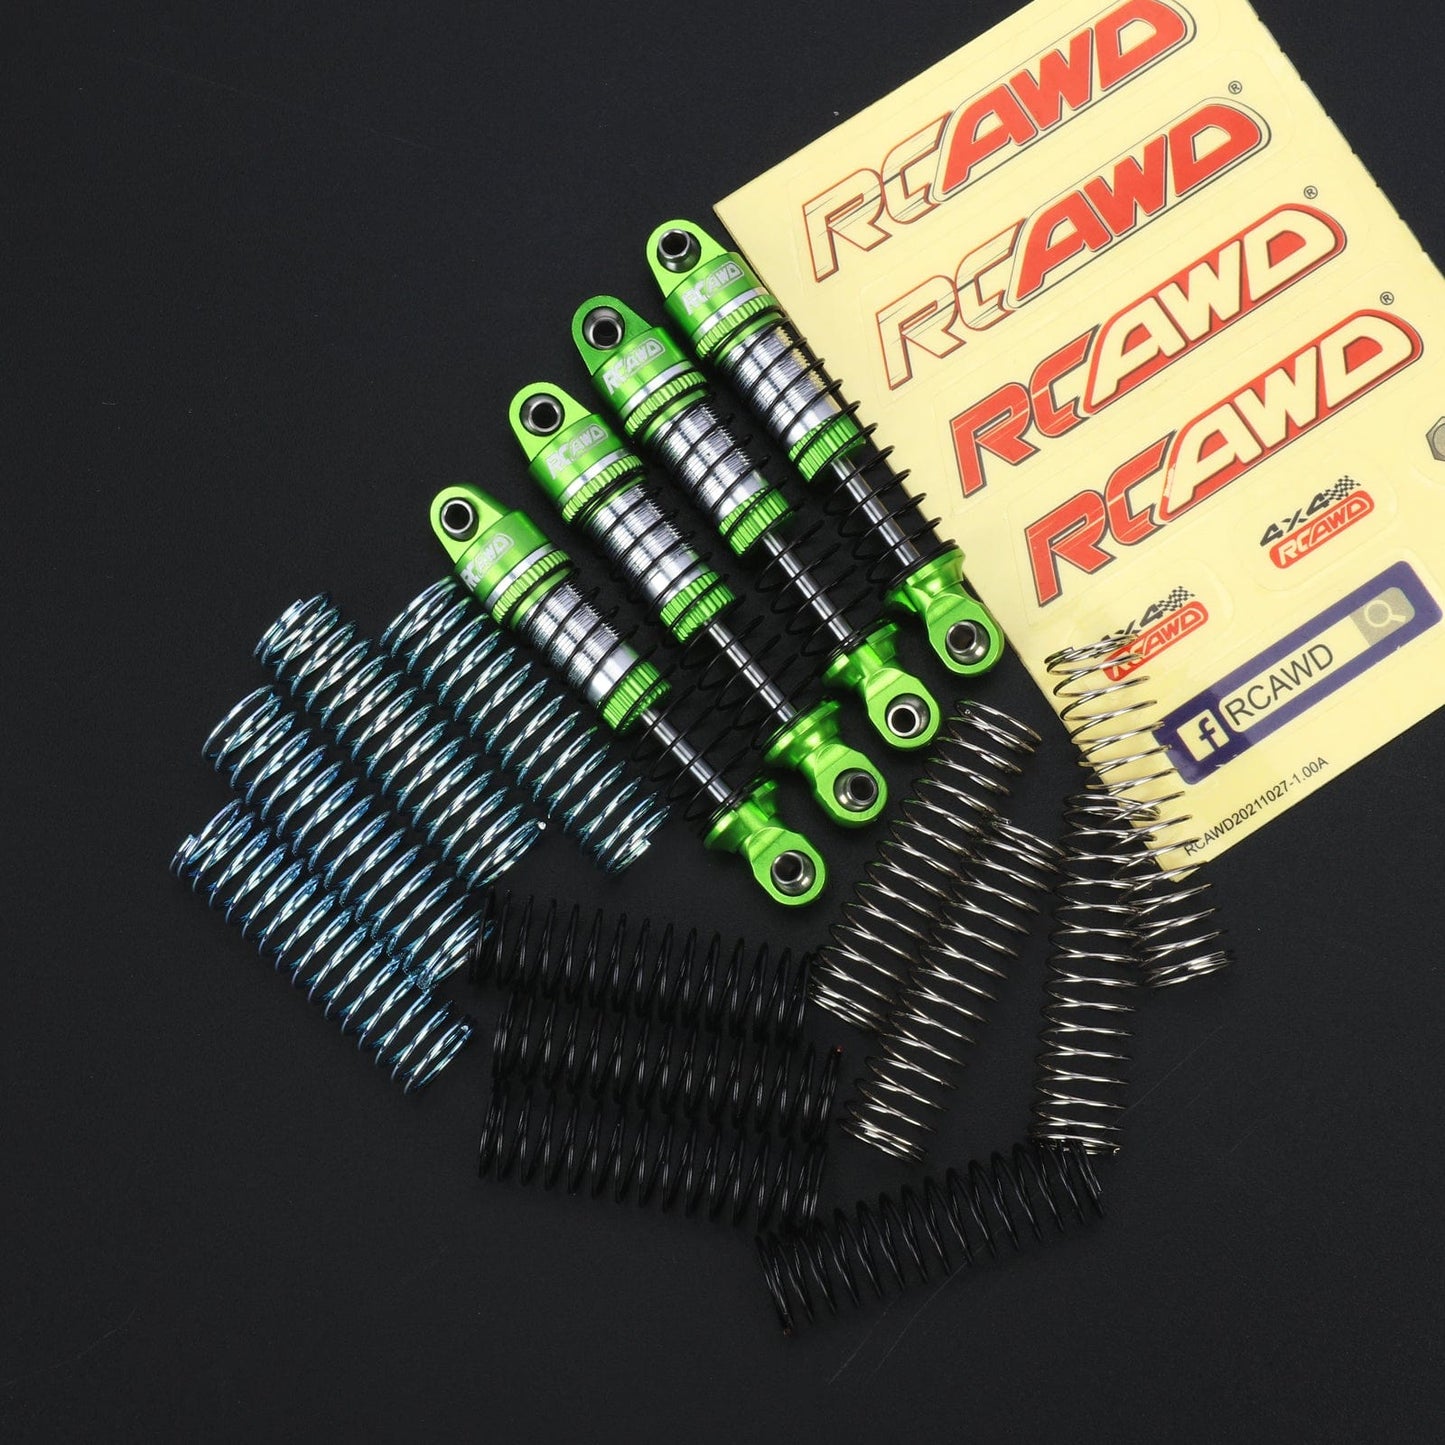 RCAWD TRXXAS TRX4M RCAWD Metal Shock Absorber for Trx4m Upgrades